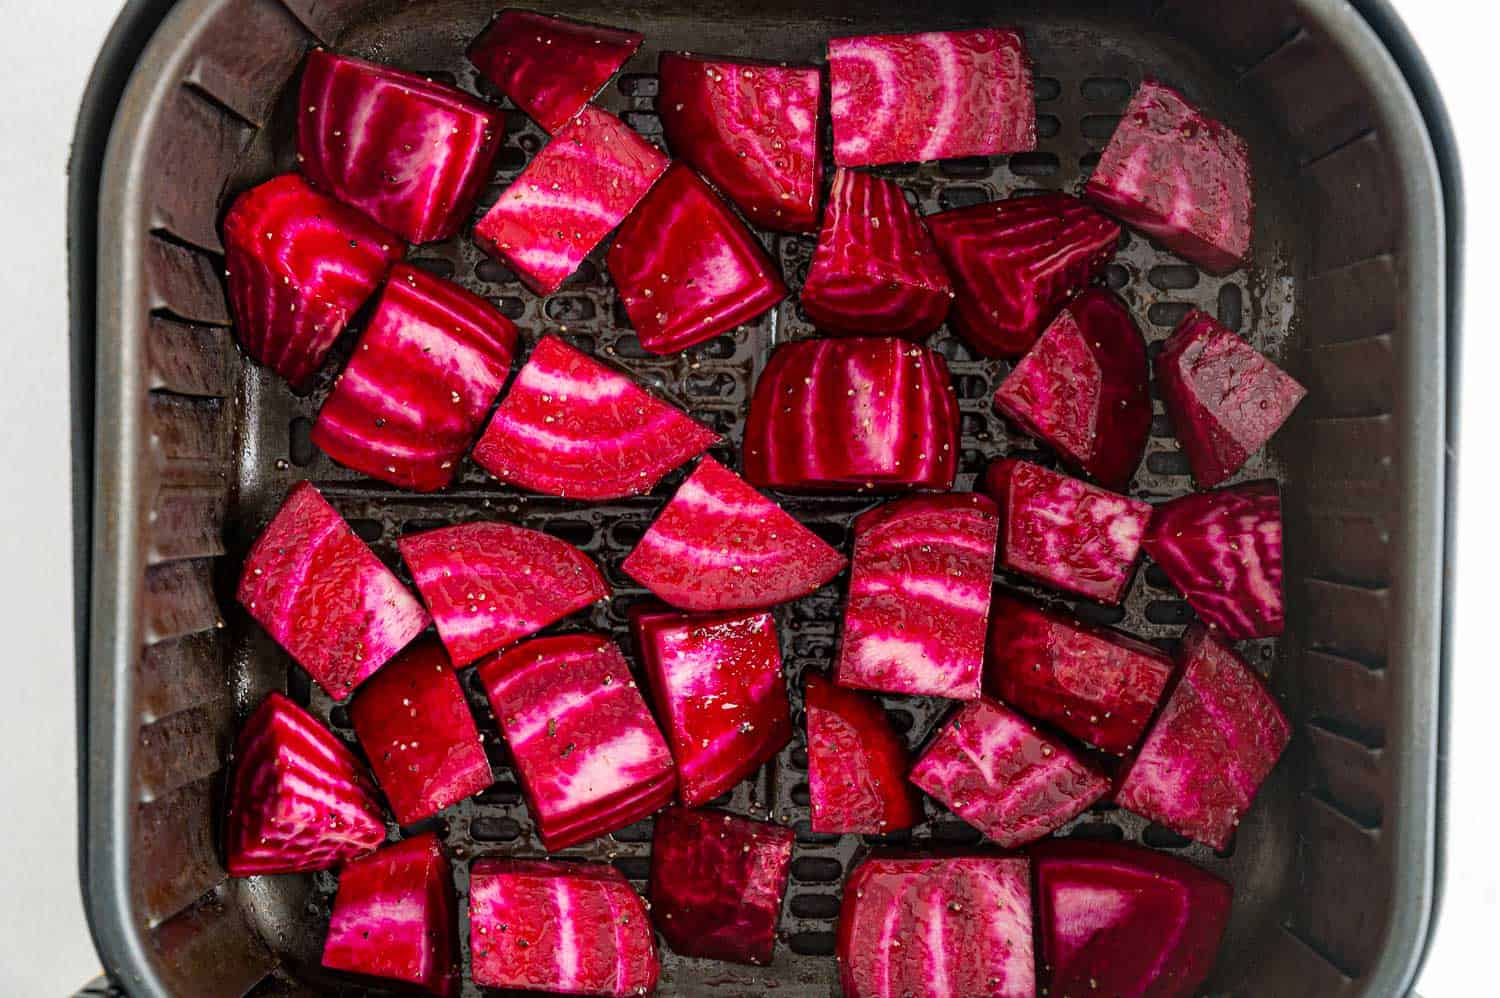 Uncooked beets in the air fryer.